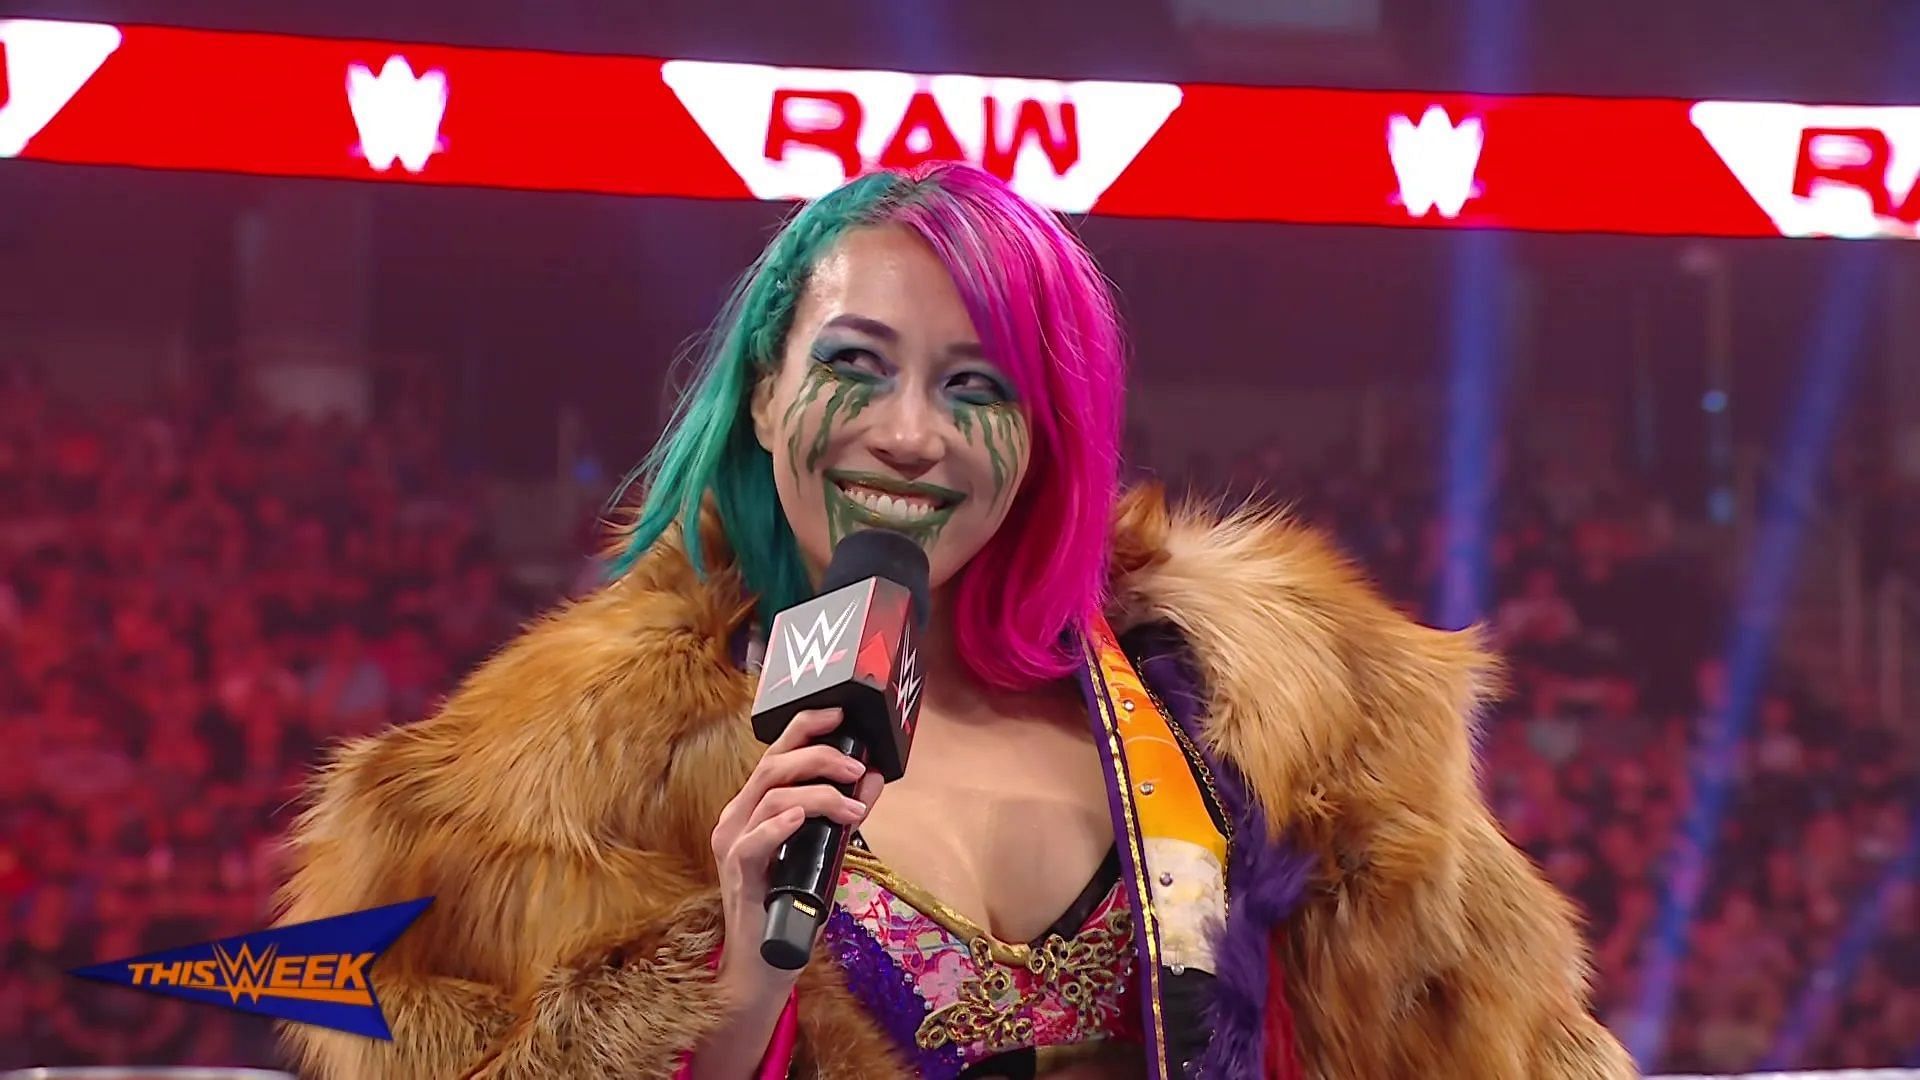 Asuka recently returned to RAW